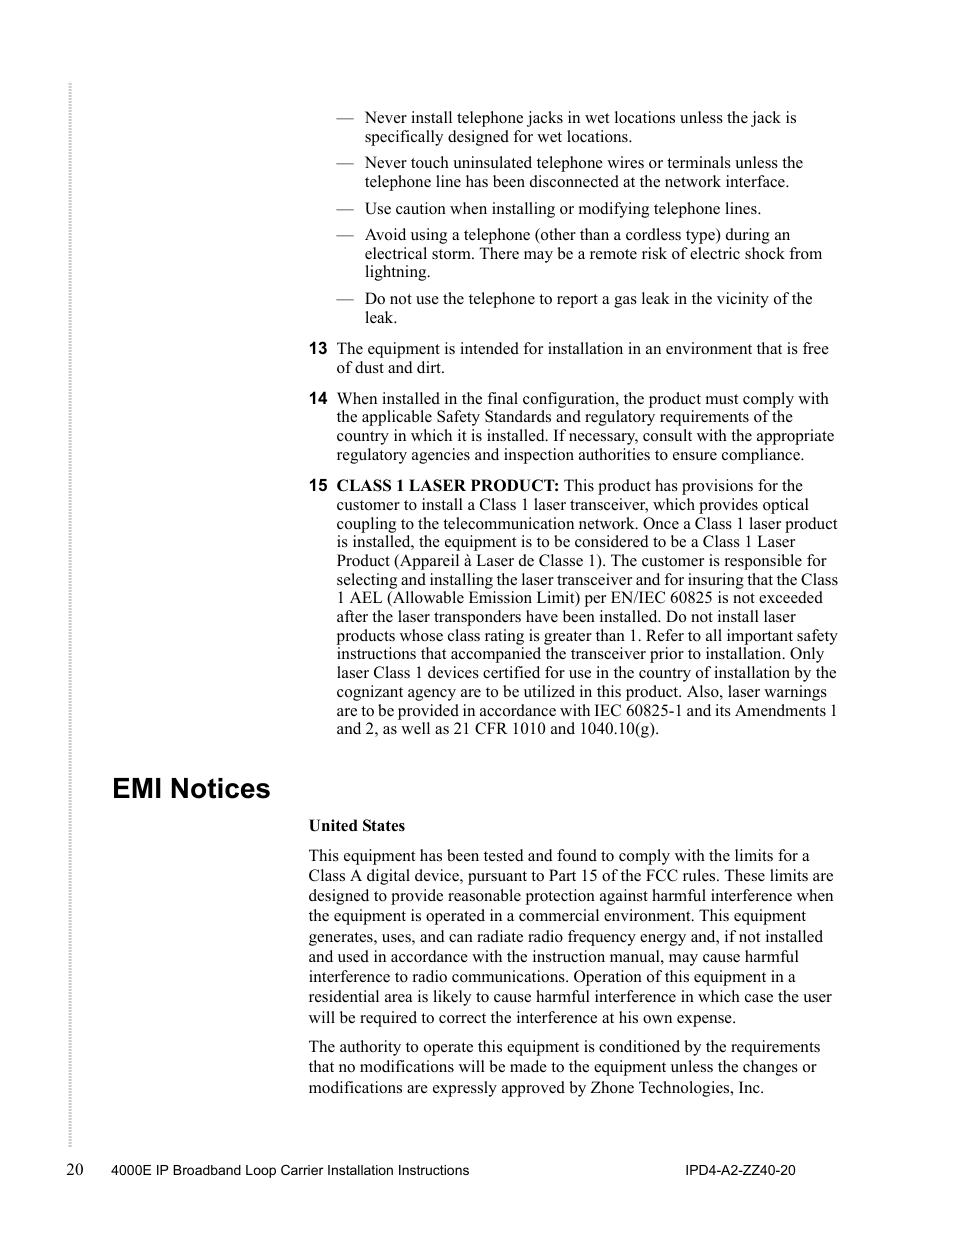 Emi notices | Zhone Technologies 4000E User Manual | Page 20 / 22